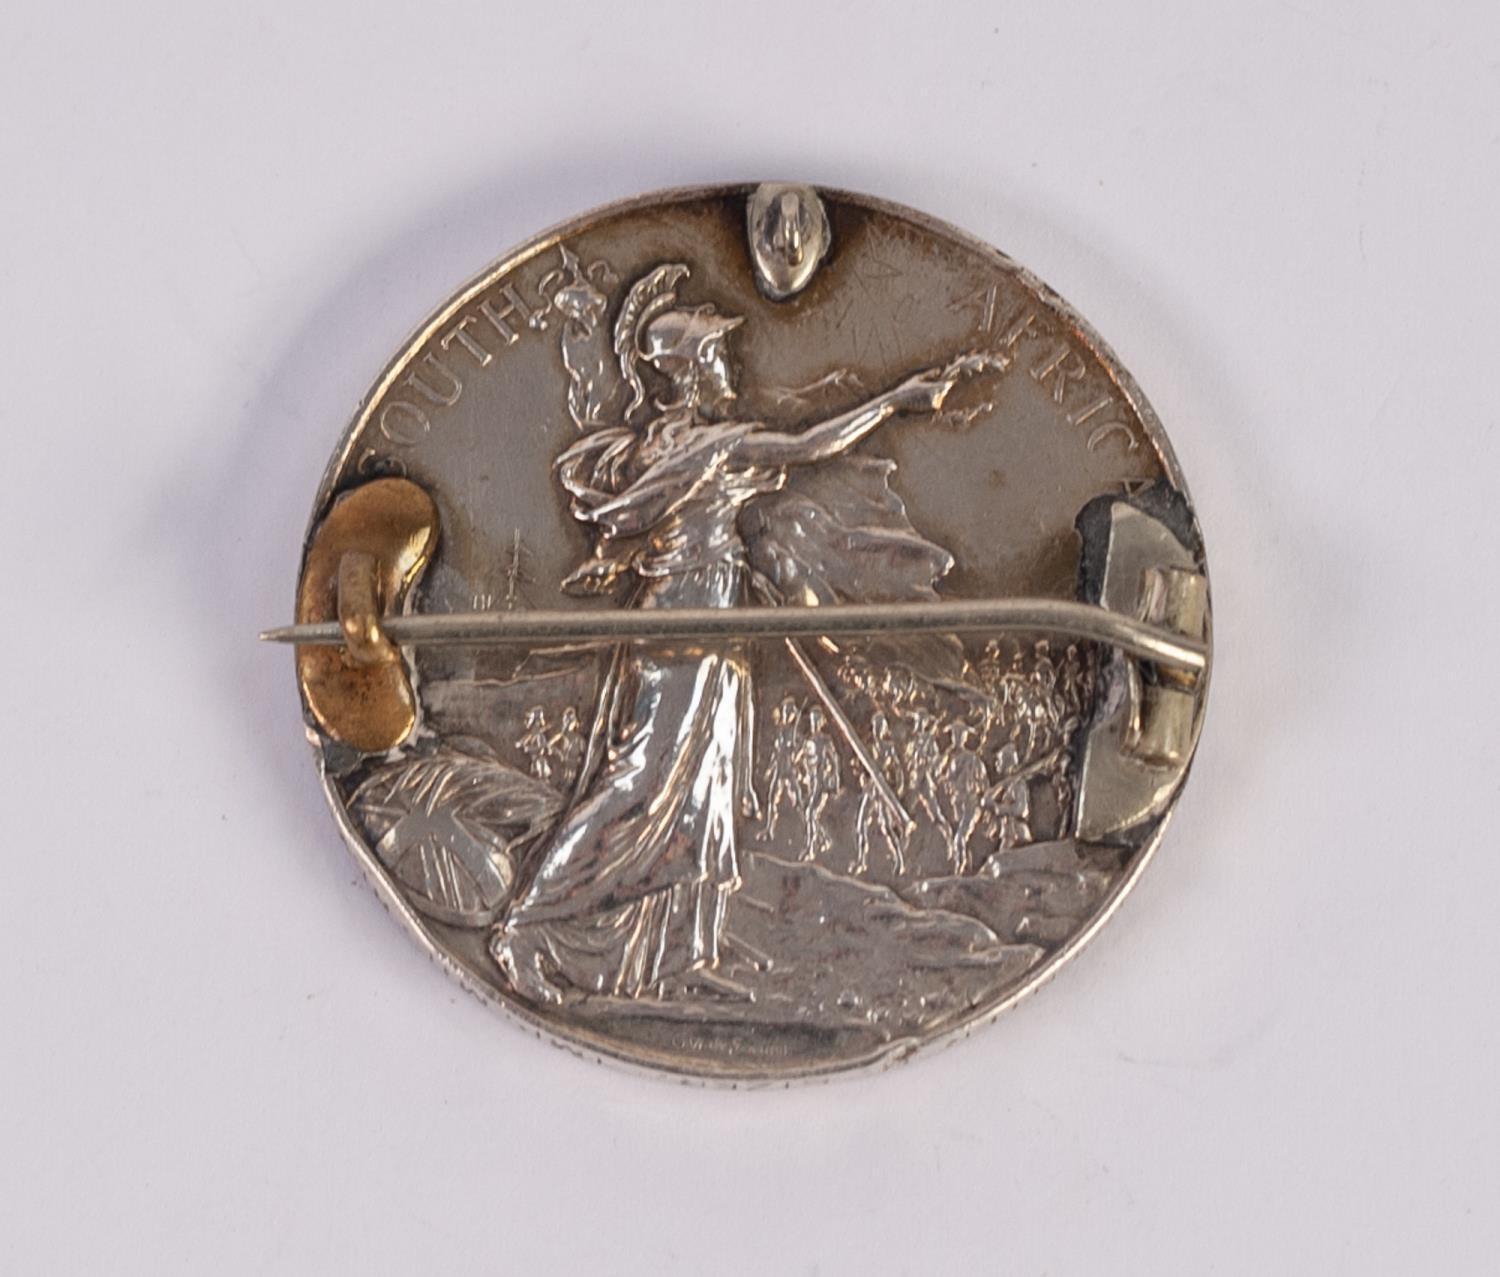 QUEENS SOUTH AFRICA MEDAL 1899-1902 with soldered pin and small loop as a brooch to the obverse, - Image 2 of 2